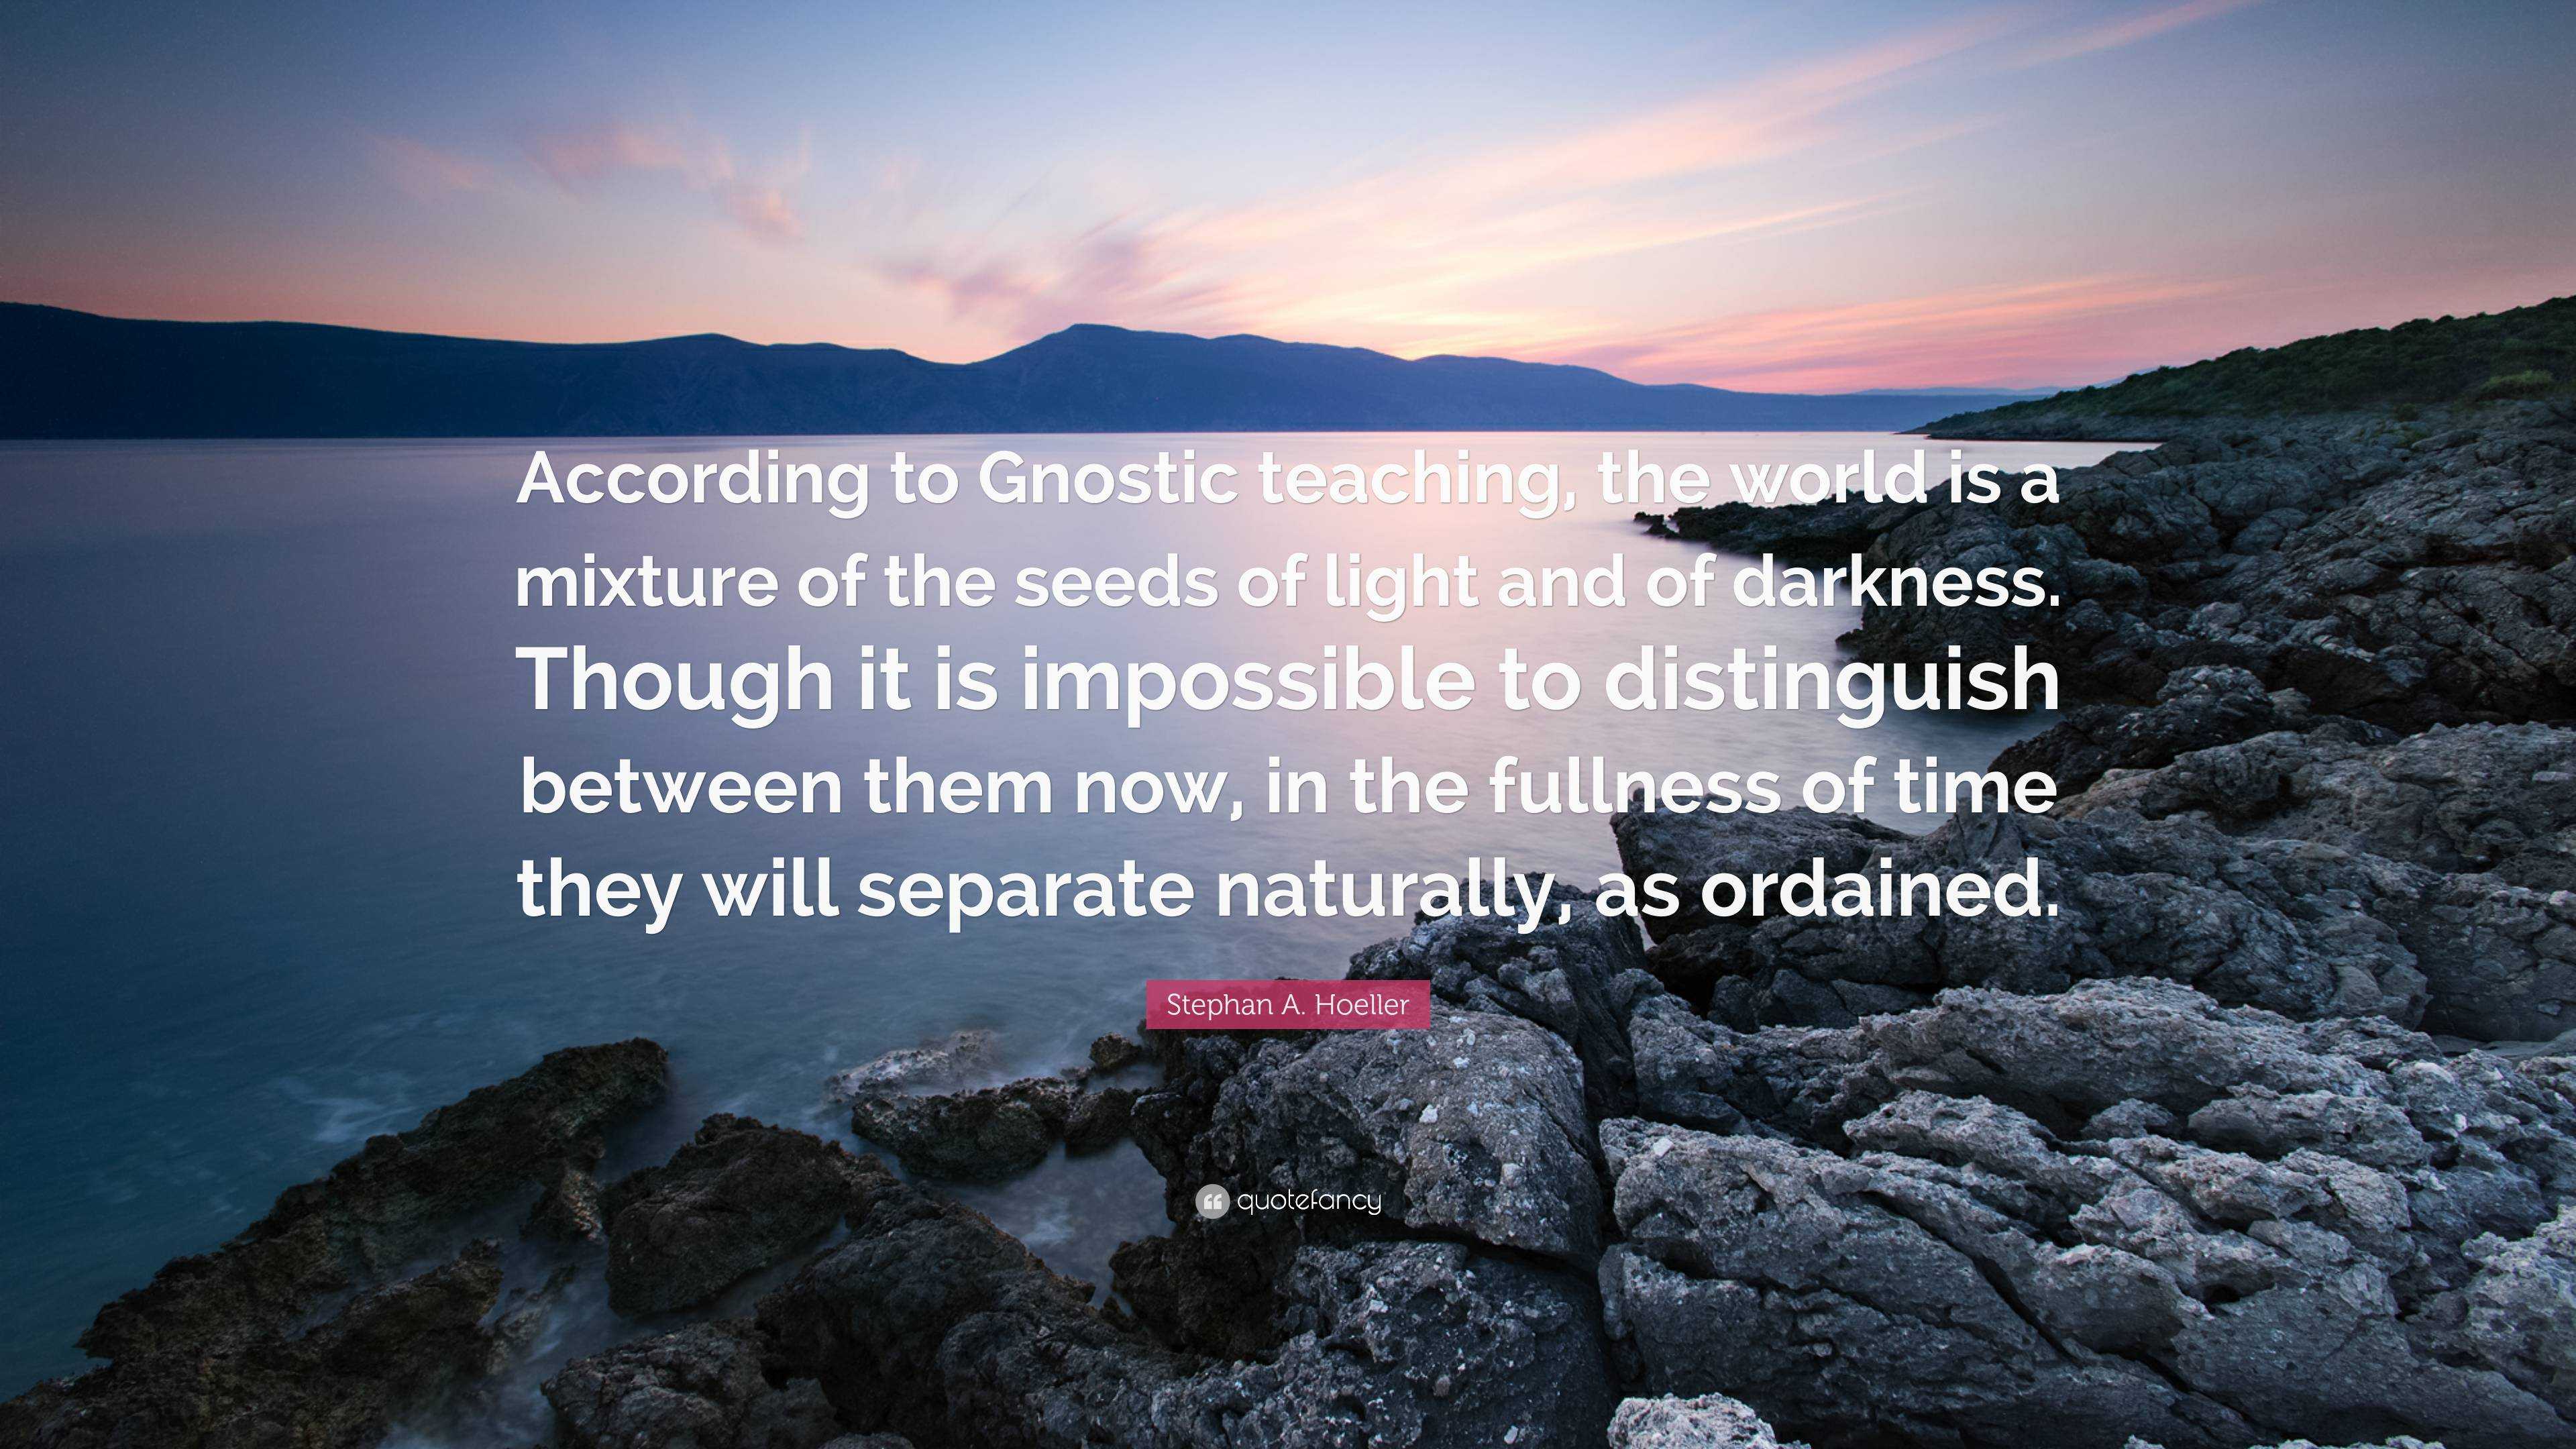 Stephan A. Hoeller Quote: “According to Gnostic teaching, the world is a mixture of the seeds of light and of darkness. Though it is impossible to ...”